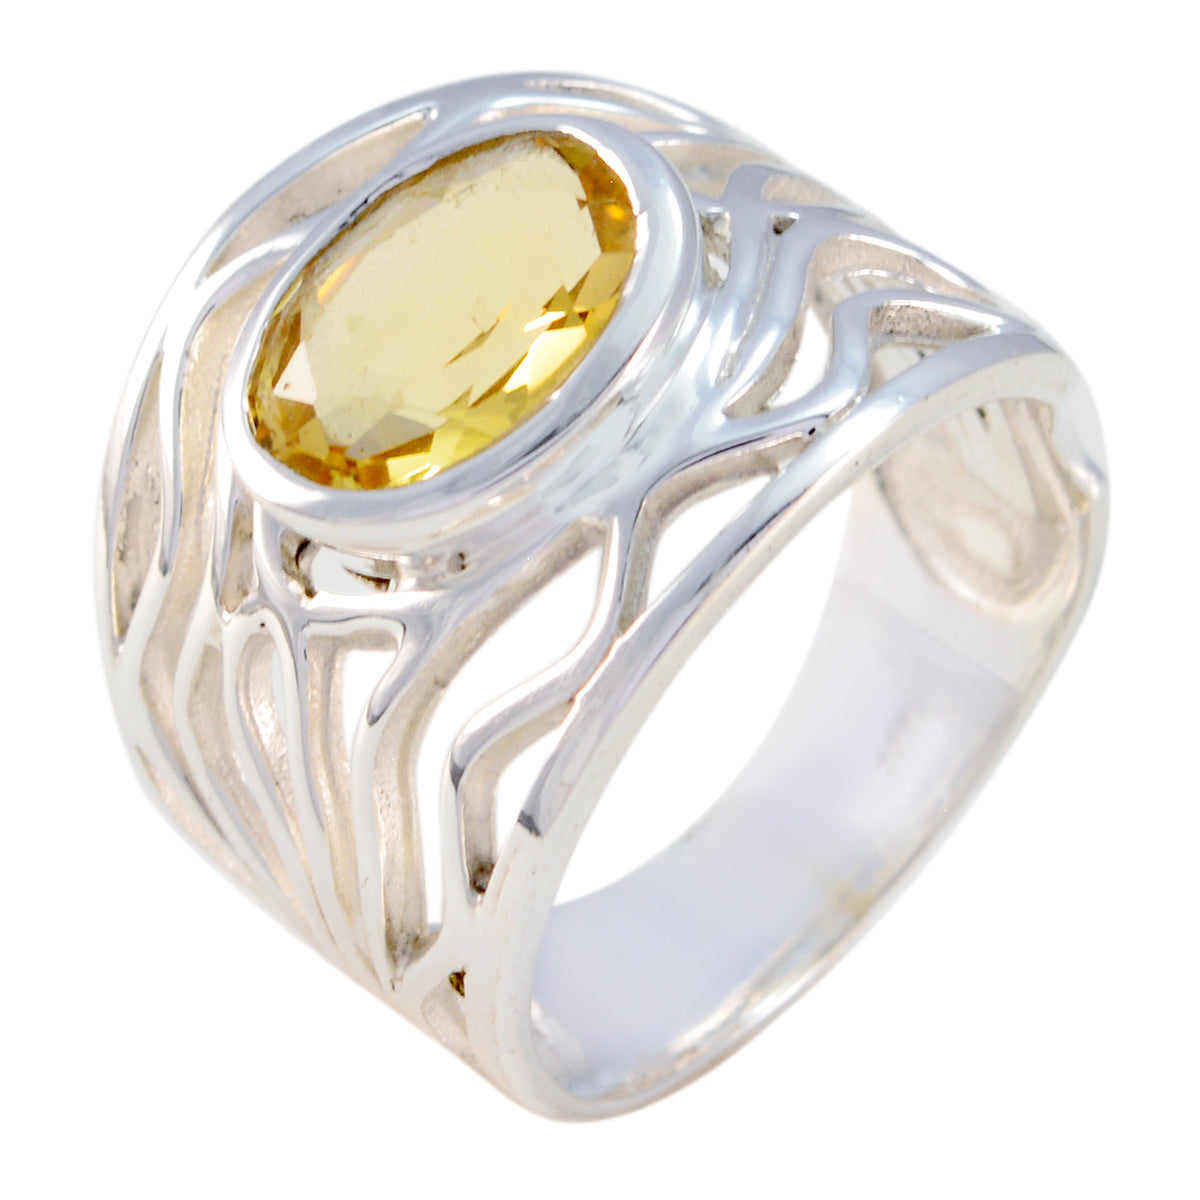 Well-Favoured Stone Citrine Solid Silver Rings Ruby Lane Jewelry